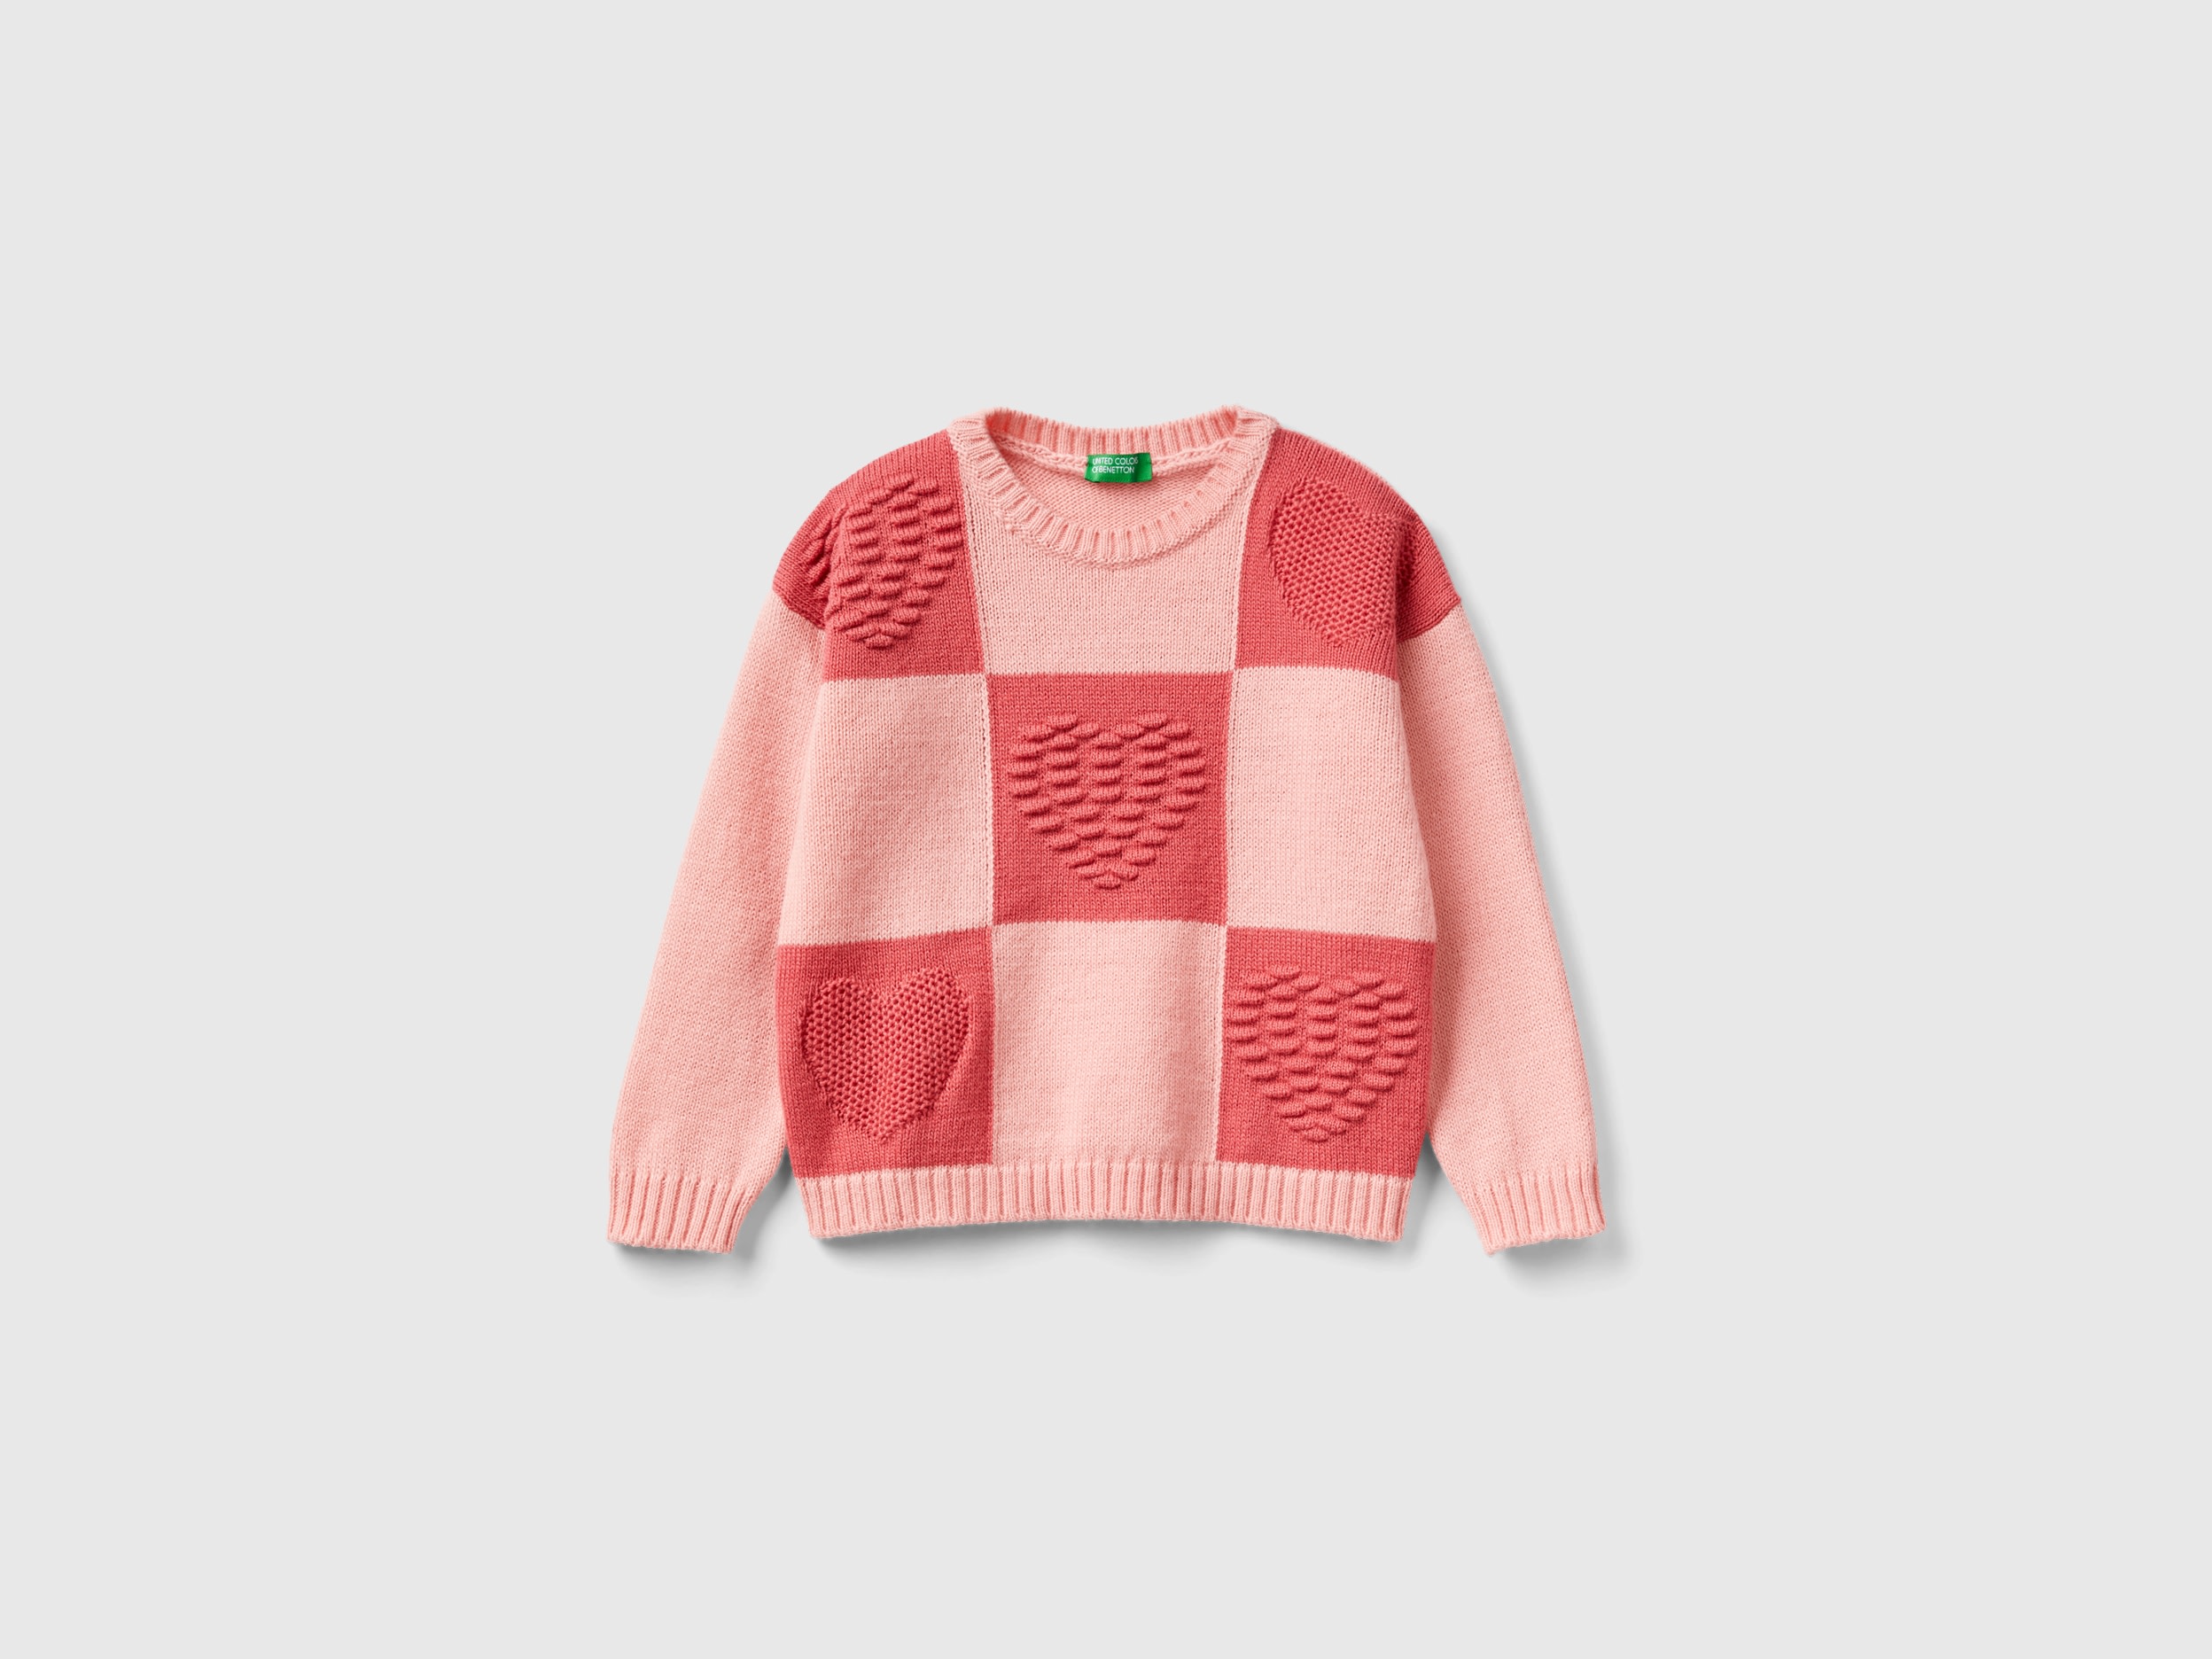 Benetton, Checkered Sweater With Hearts, size 5-6, Pink, Kids